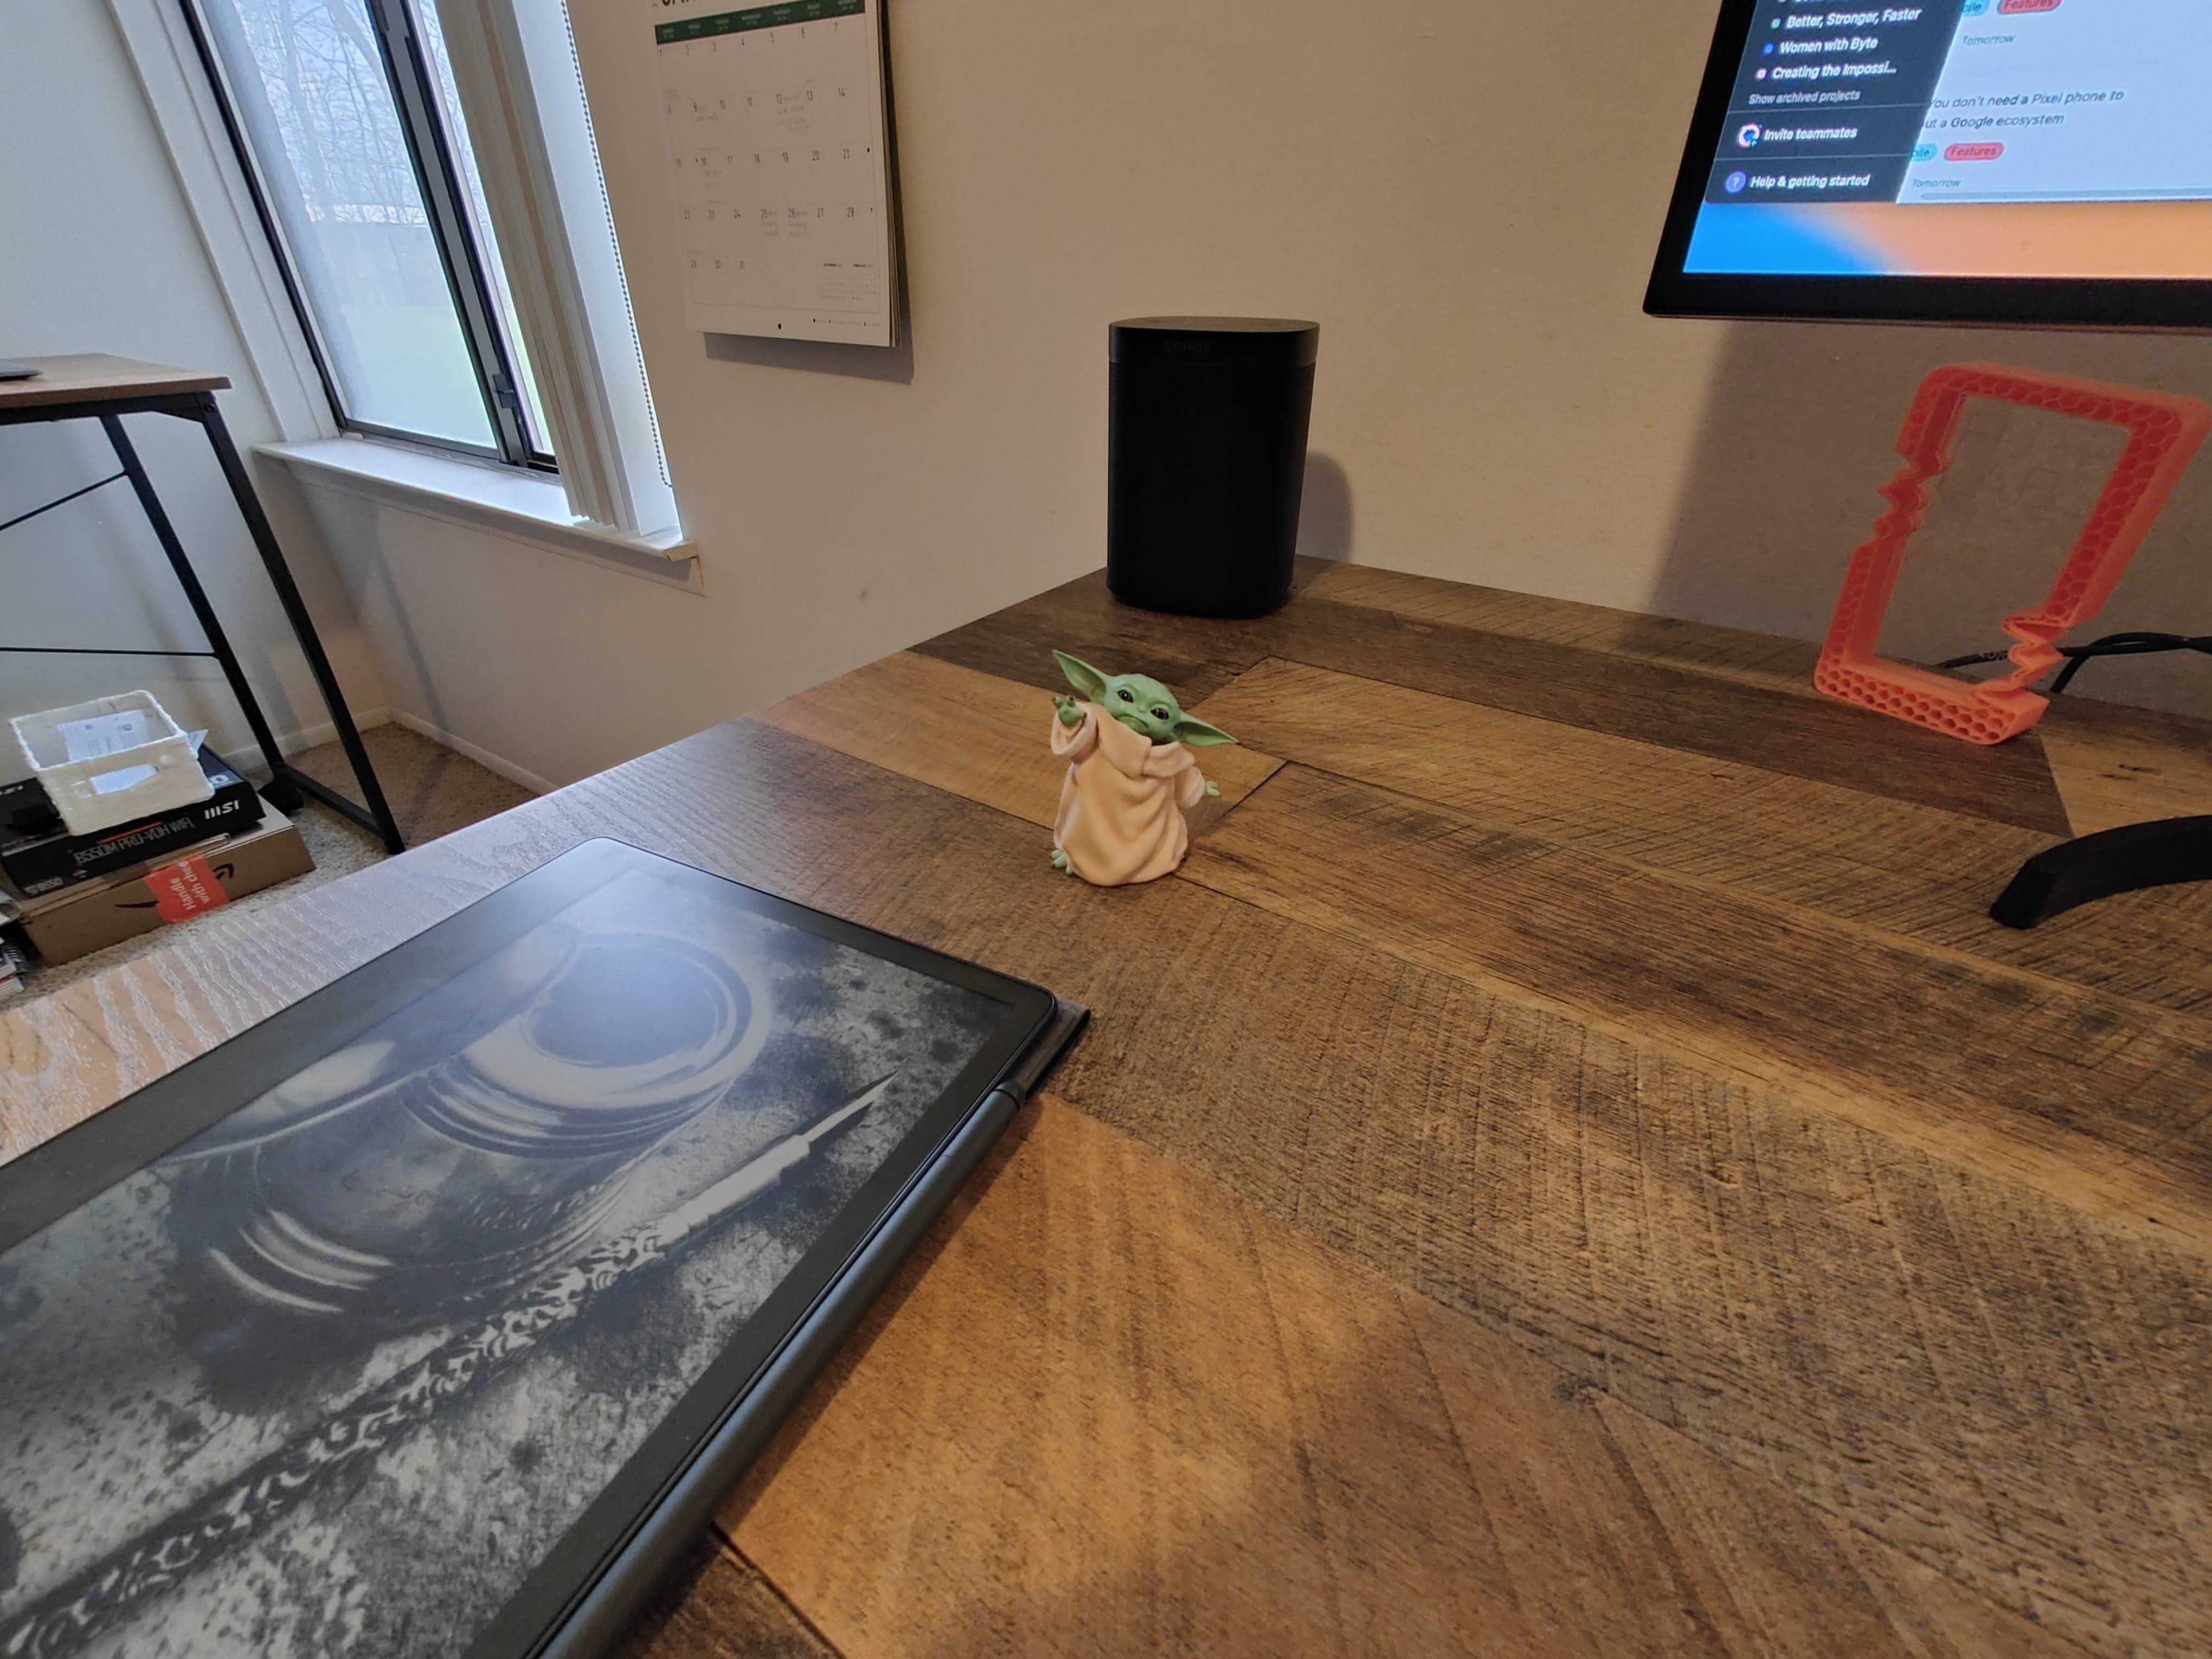 Camera sample from the OnePlus 10 Pro. It's a photo of a small baby Yoda figurine on a desk.